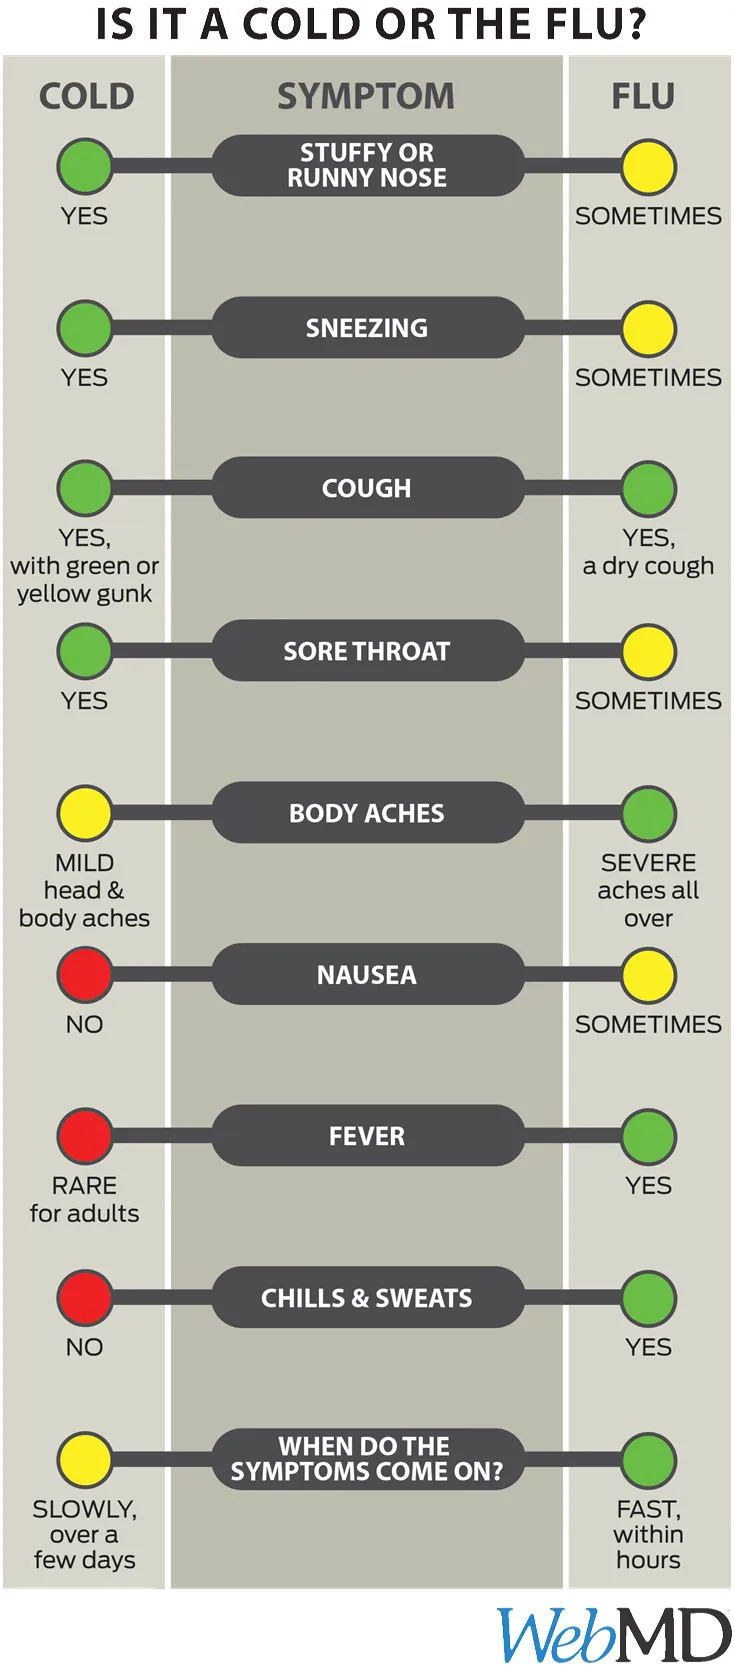 is it cold or flu?